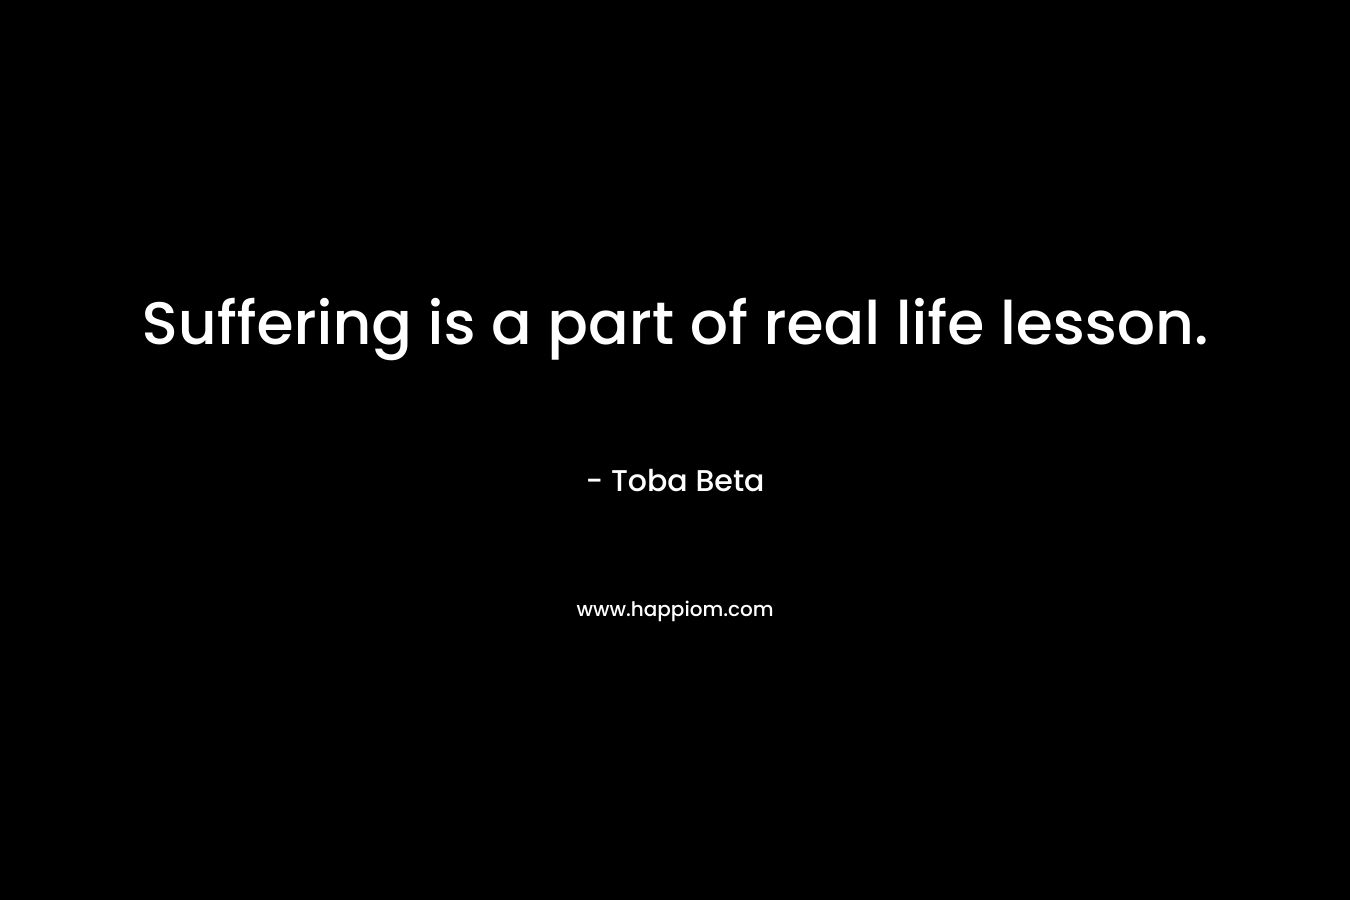 Suffering is a part of real life lesson.